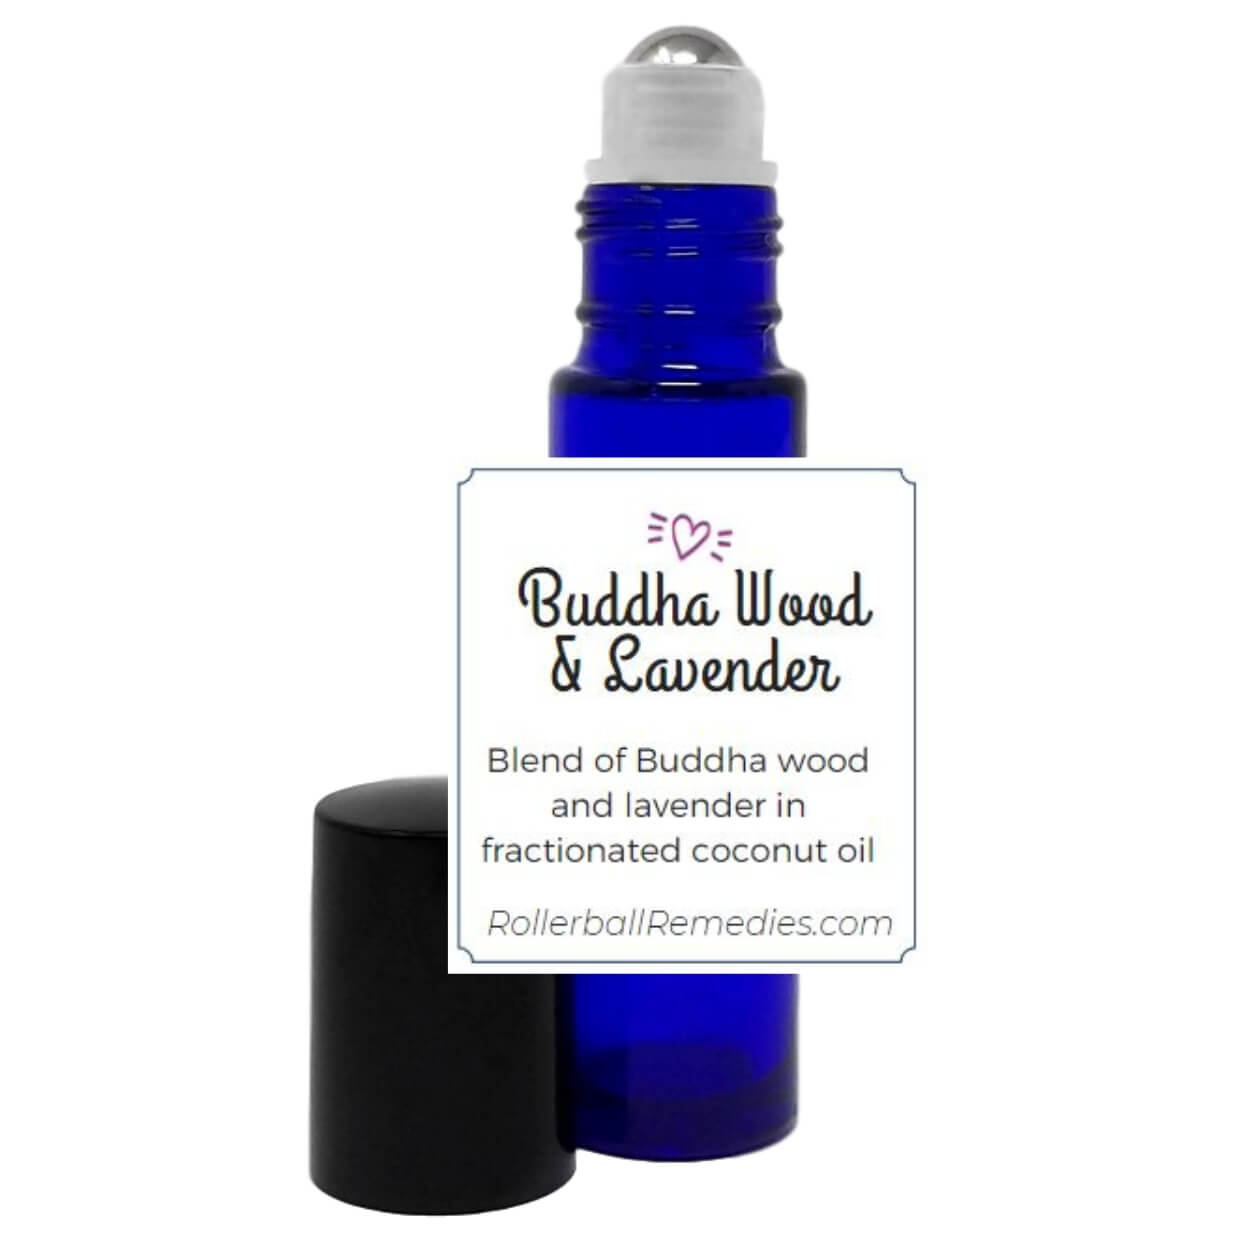 Buddha Wood and Lavender Essential Oil Roller Blend for Peace